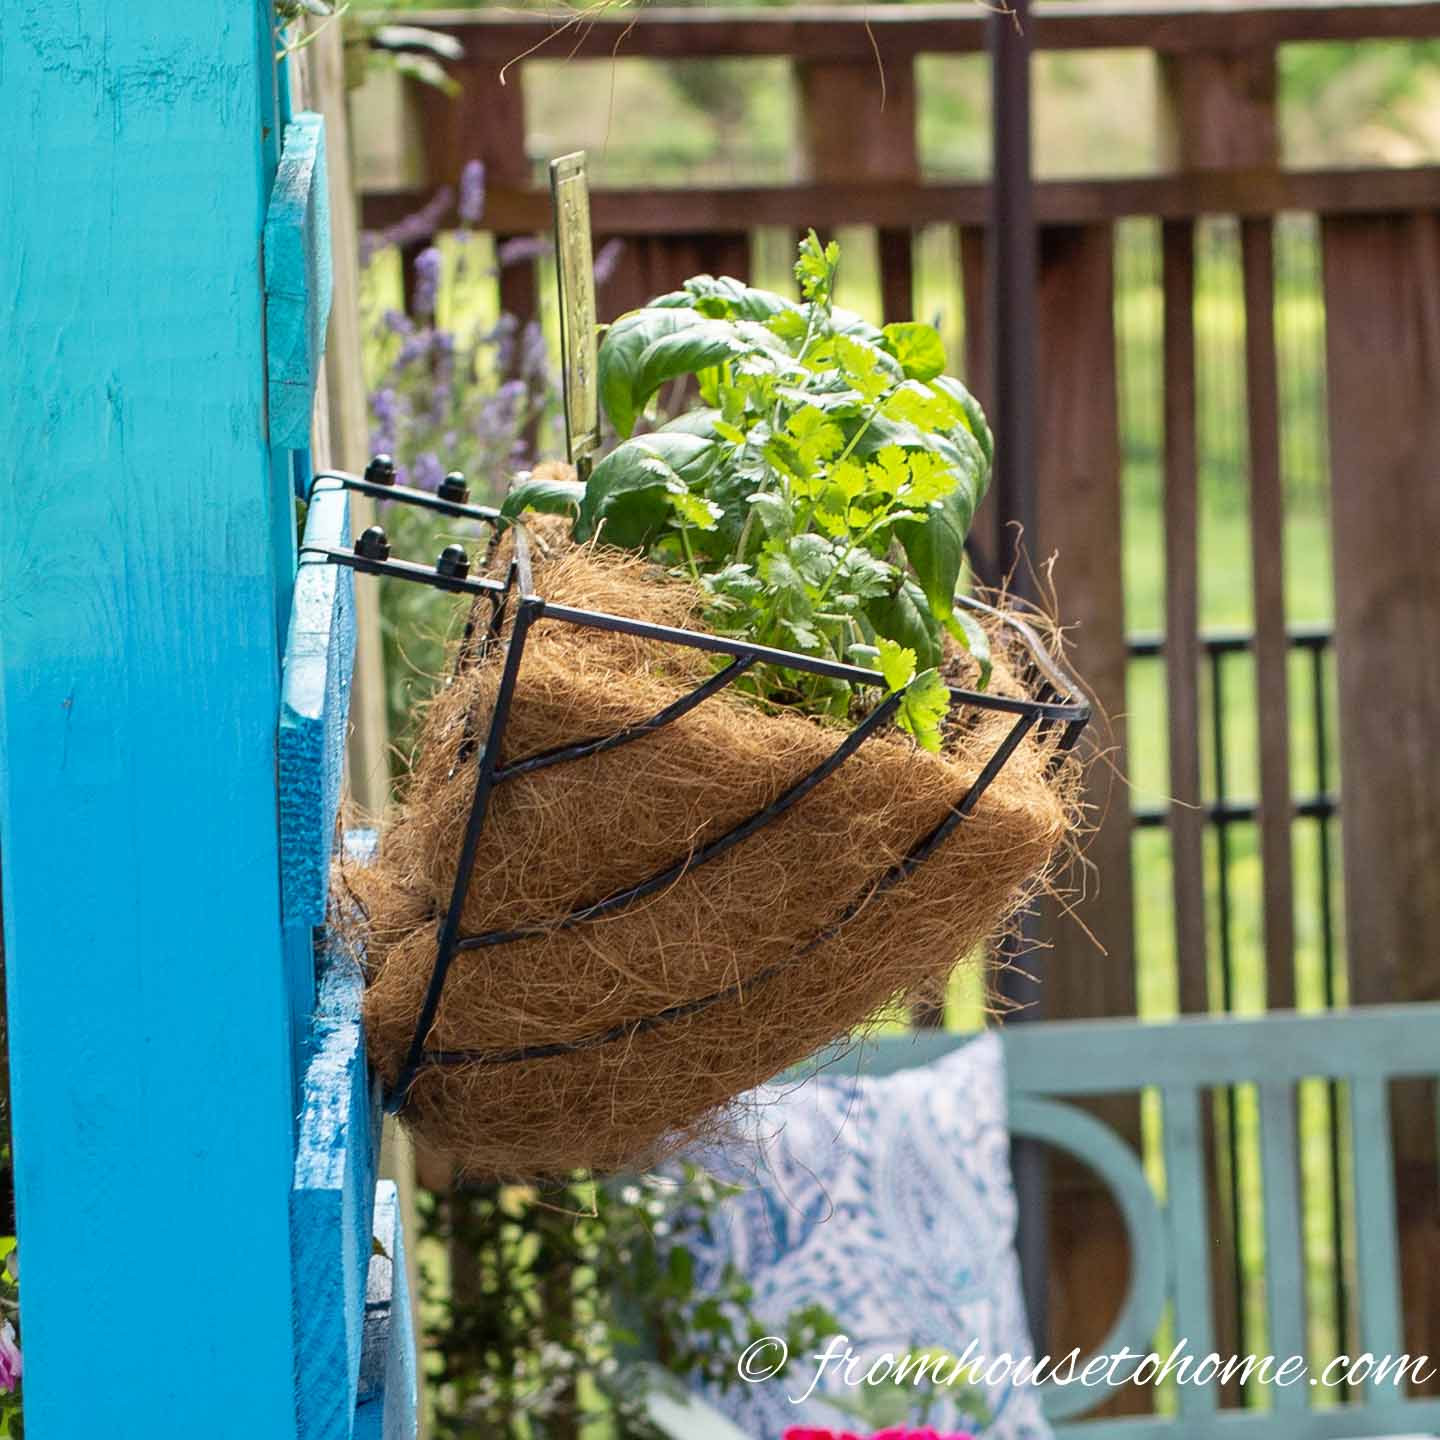 Window box herb garden hanging on a turquoise pallet